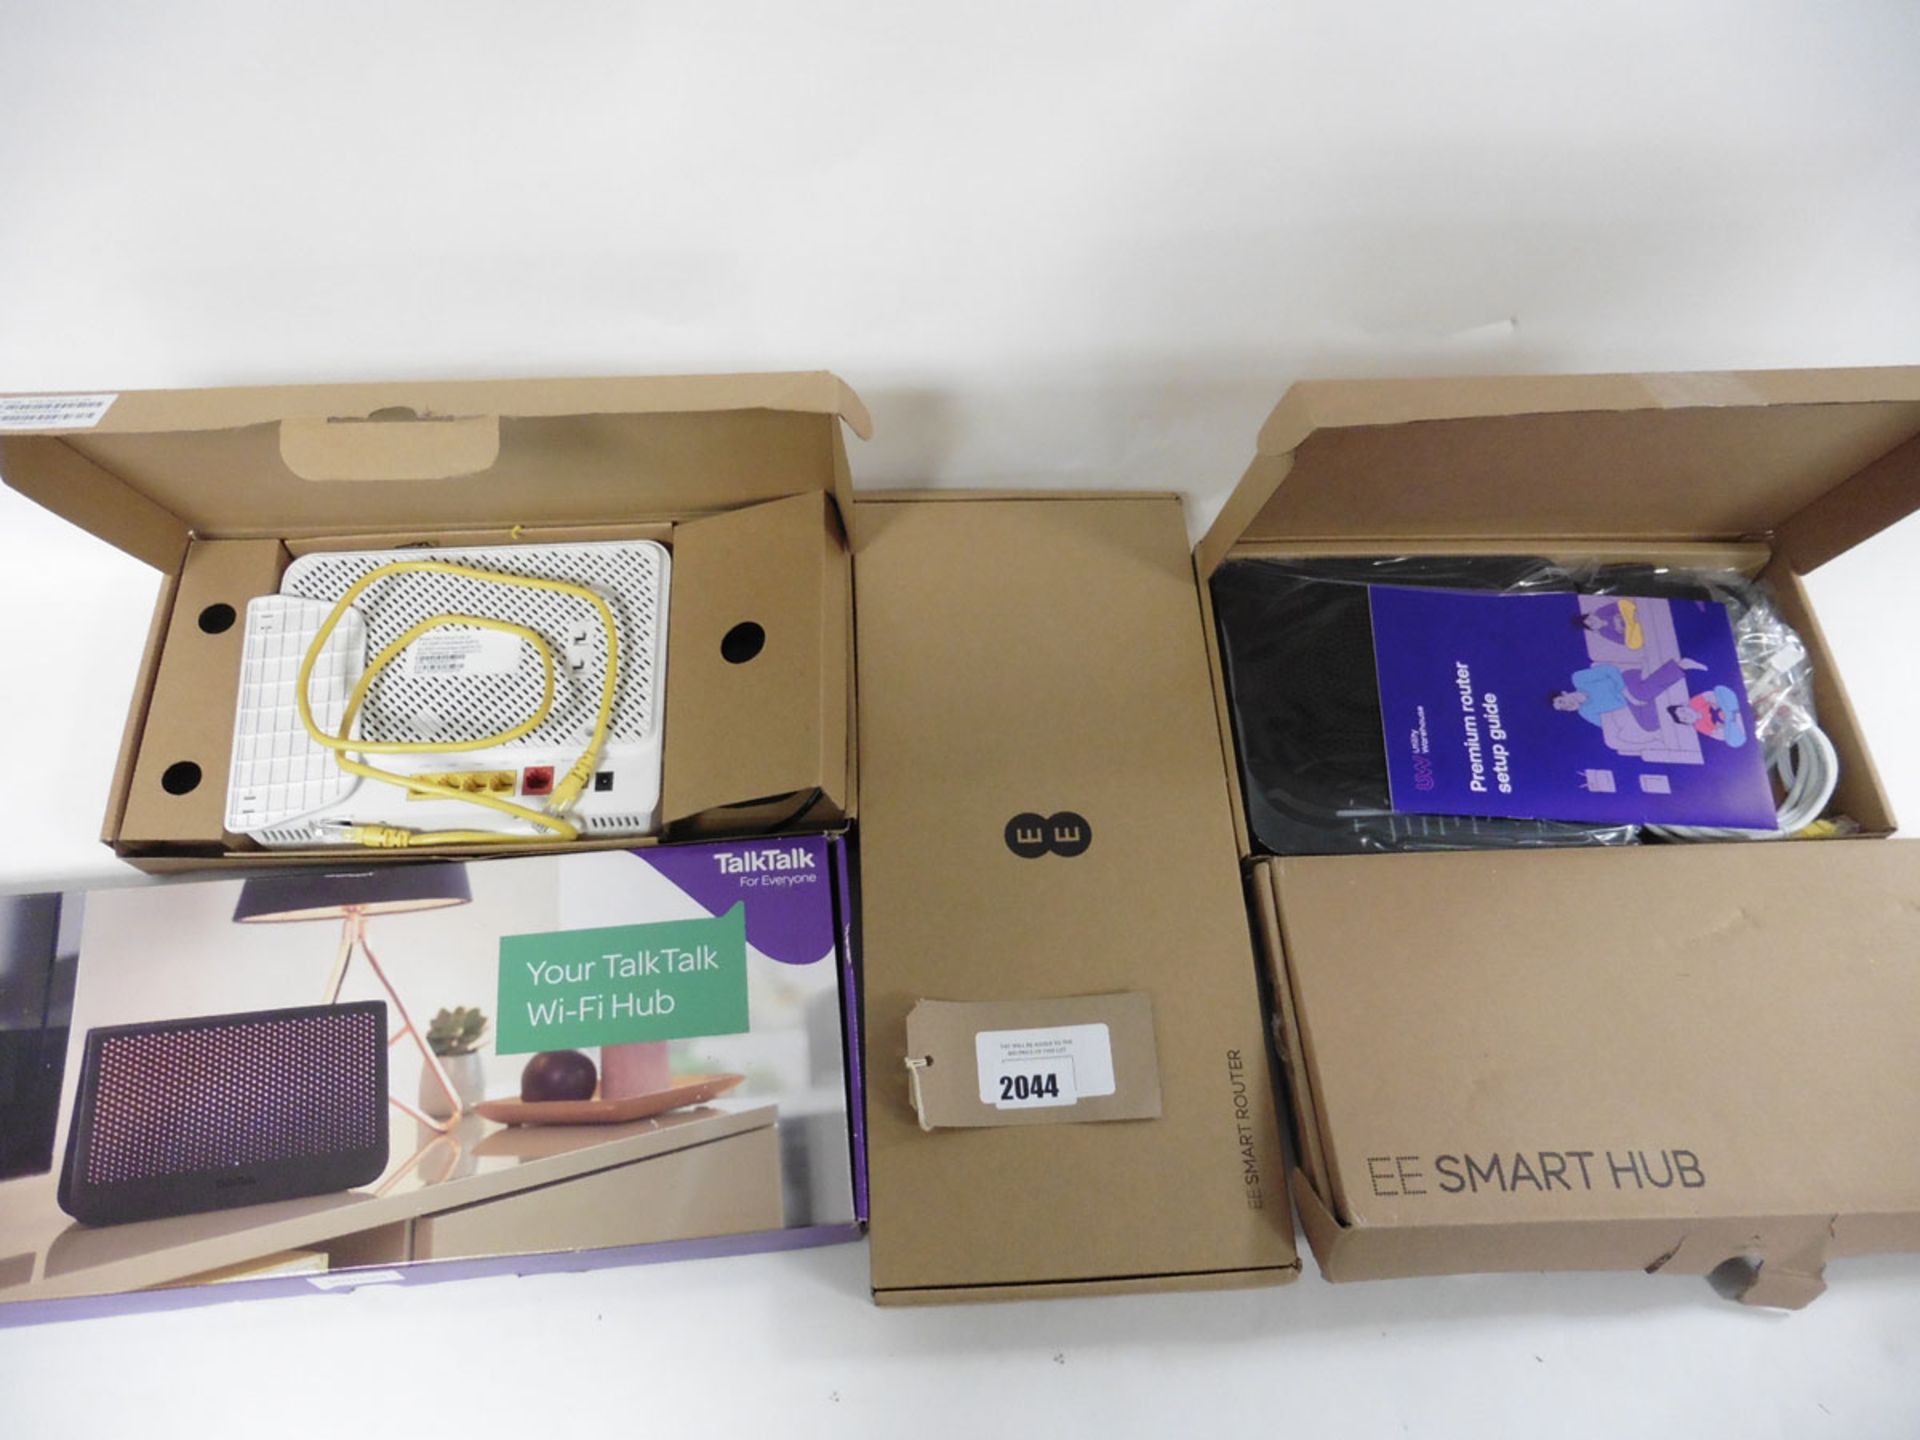 2 EE smart routers, 1 Direct Save TWV63167 router, 1 Technicolor DWA0120 router & 1 Talktalk wifi